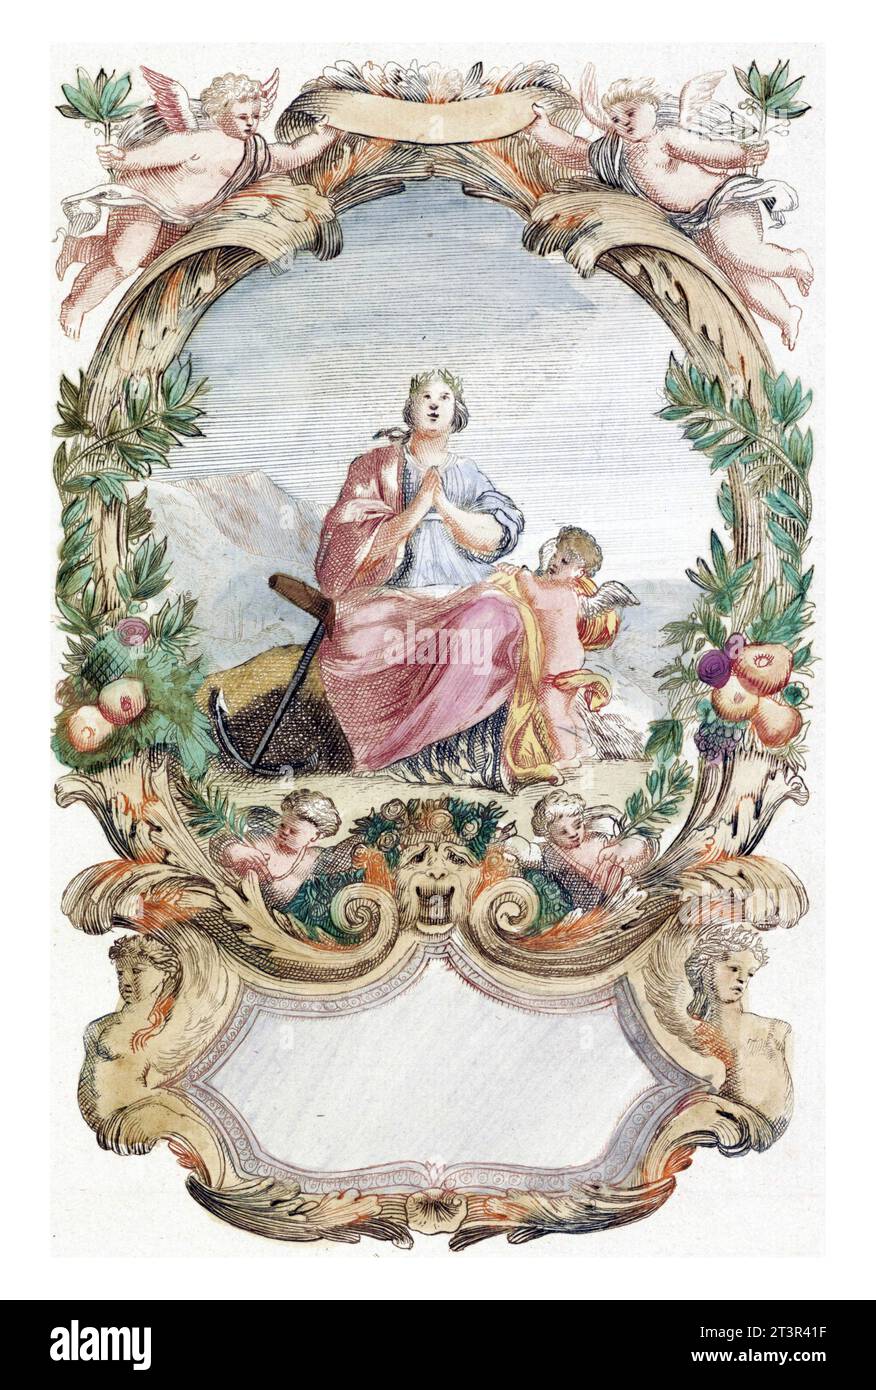 Personification of Hope, anonymous, 1688 - 1698 The Hope, with her anchor beside her, looks up at the sky with folded hands. Next to her is a putto. Stock Photo